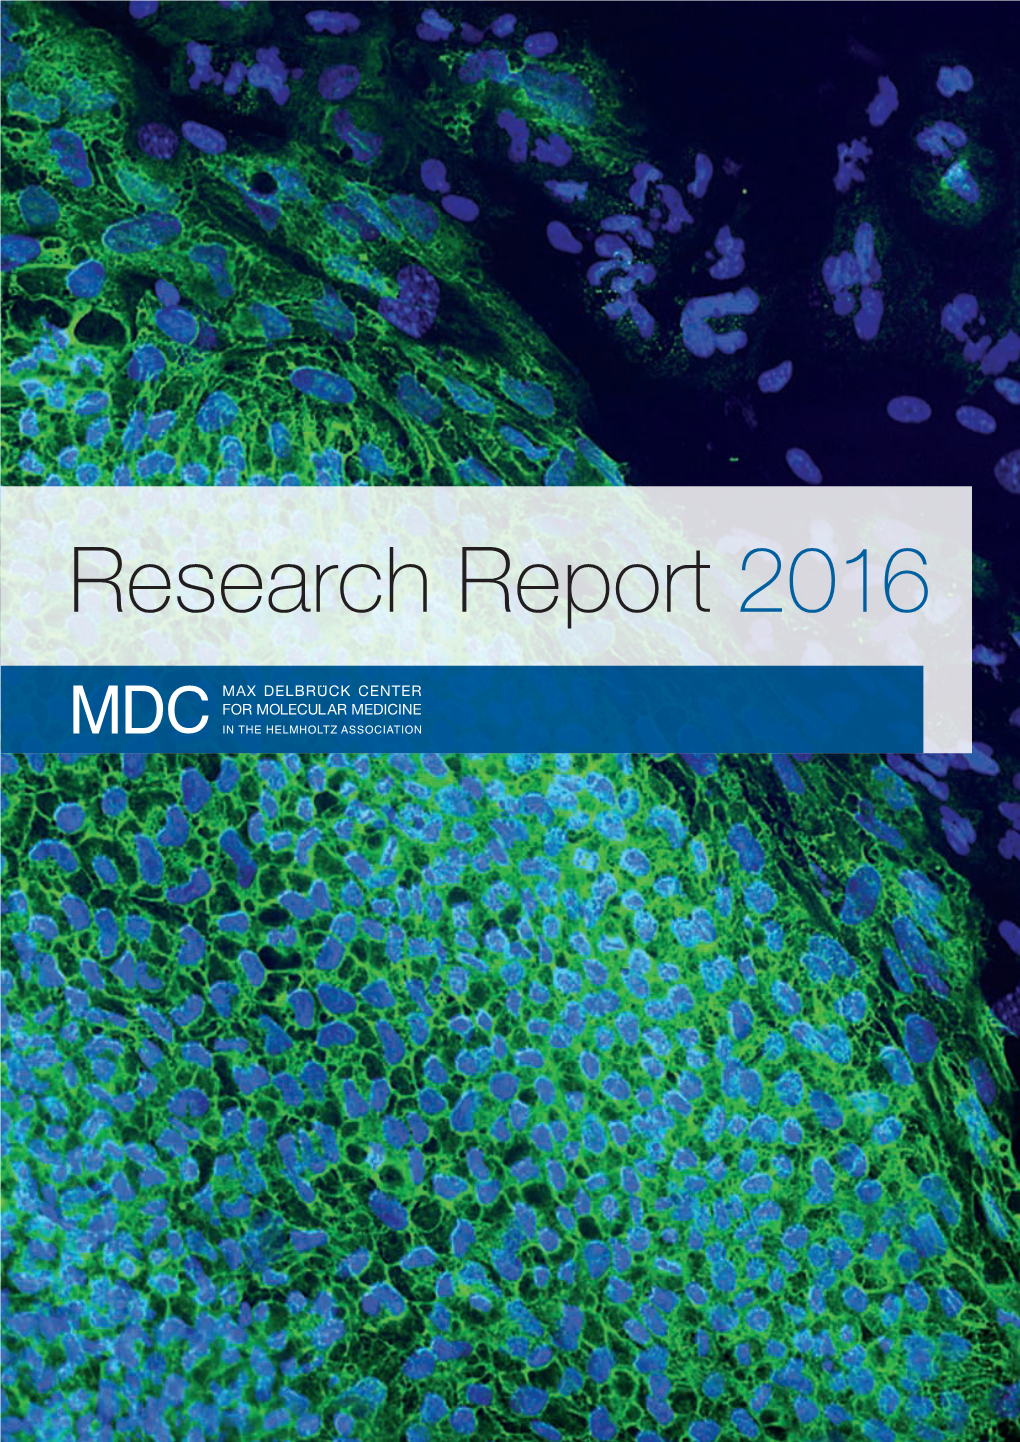 Research Report 2016 Image Captions Research Report 2016 (Covers the Period 2014-2016) Cover: Are Actually Induced Pluripotent Stem Cells in a Pluripotency Test